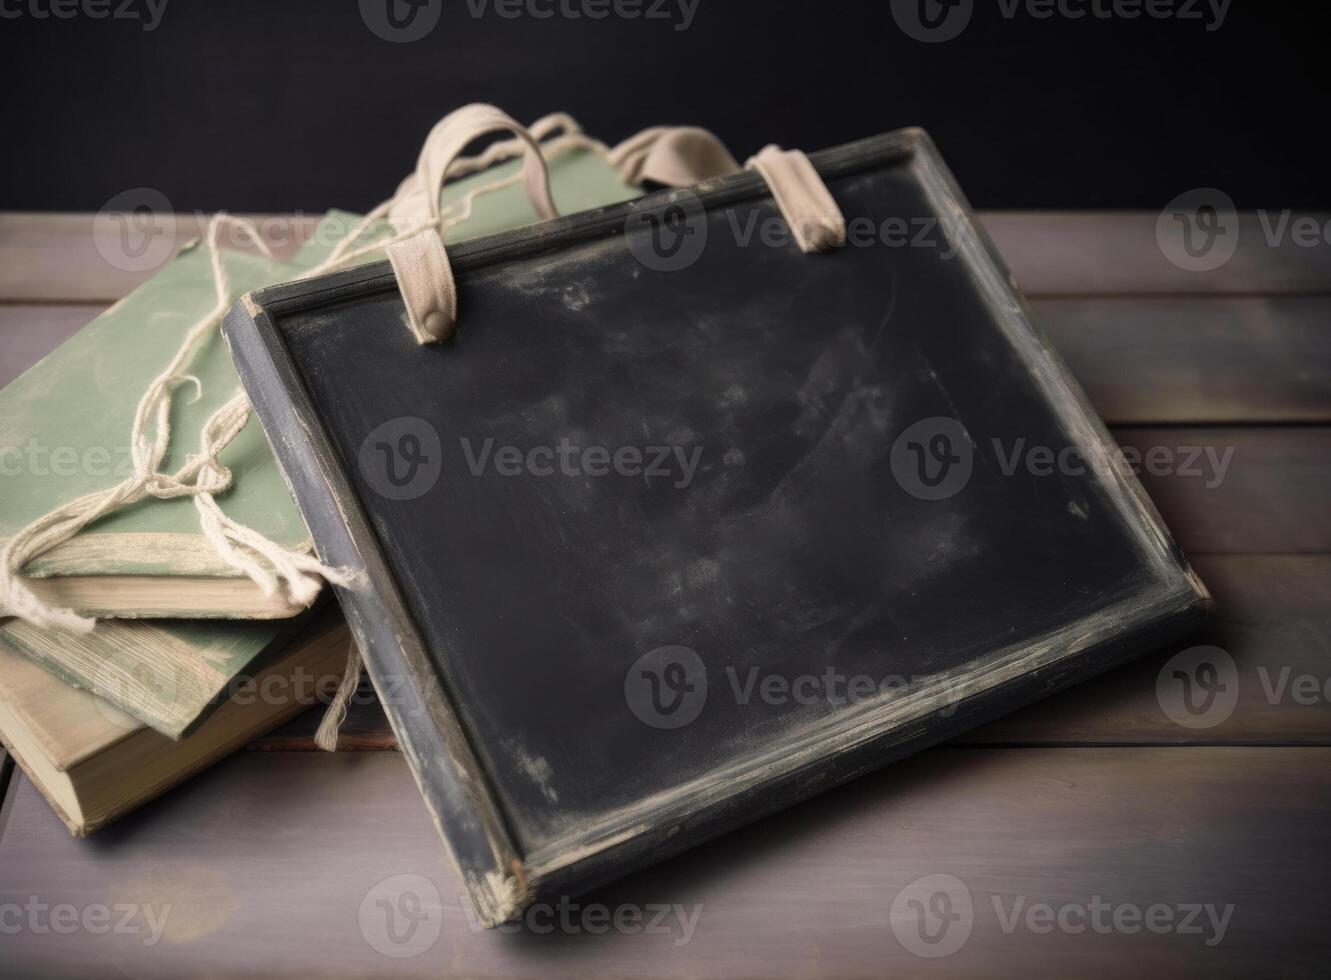 Illustration of a stack of books on a rustic wooden table created with technology photo